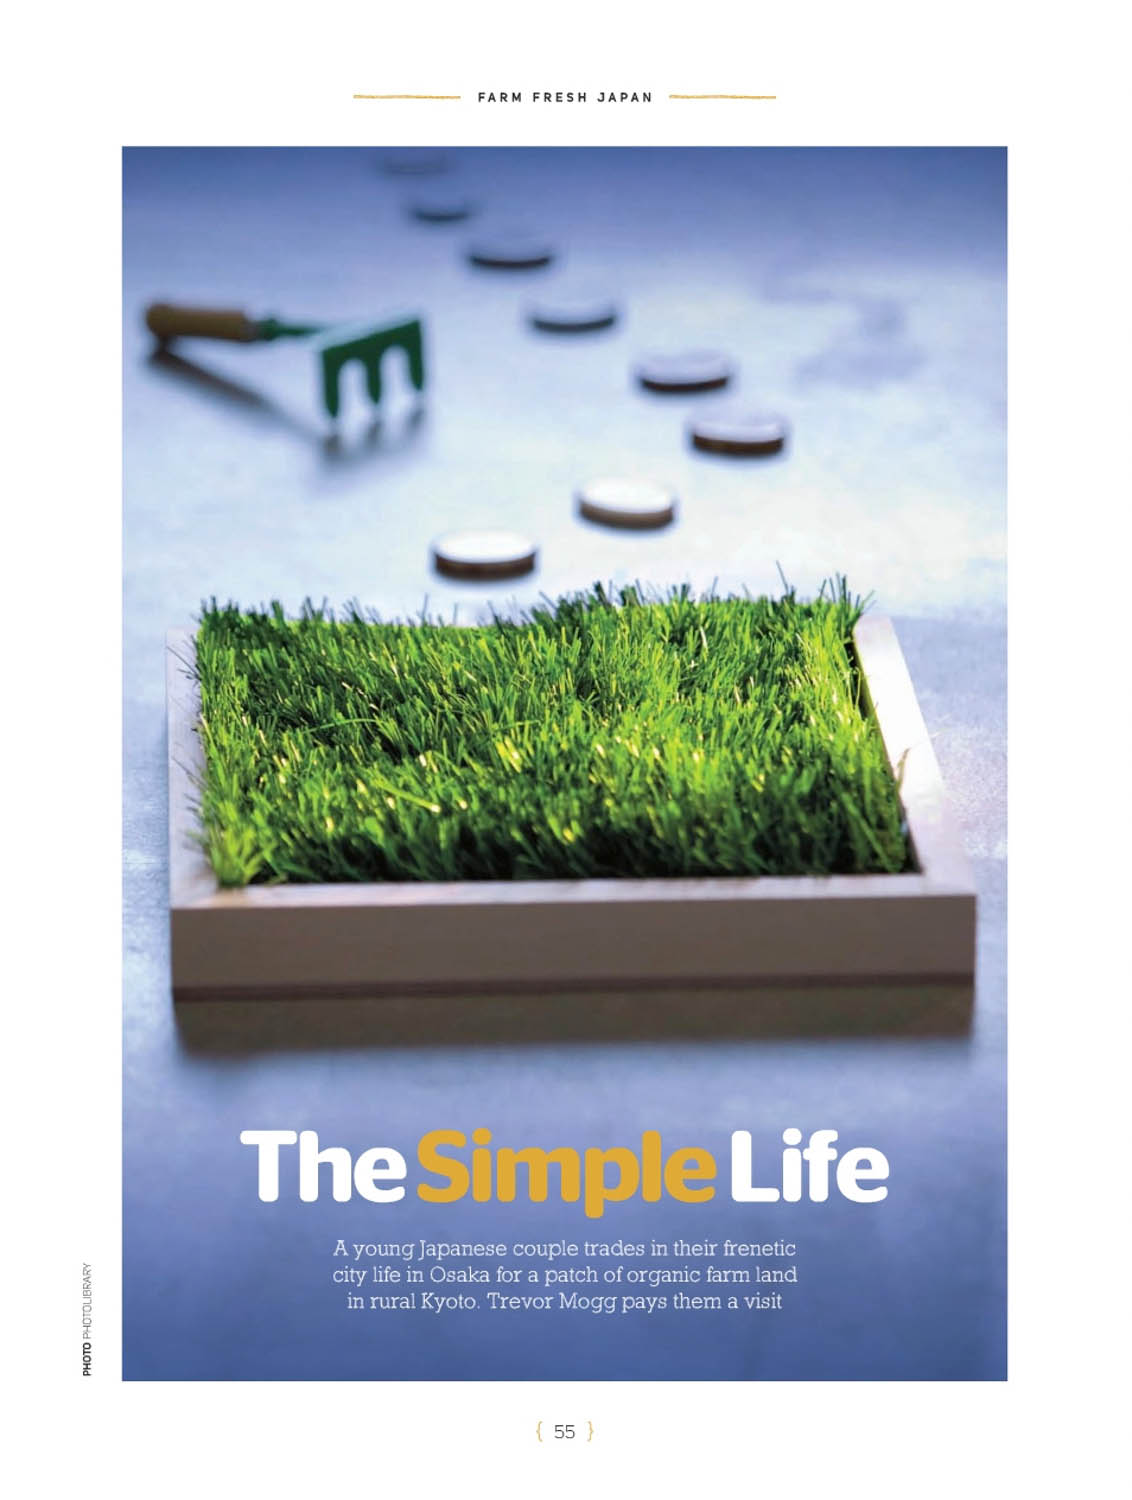  The Simple Life - 1 of 3 